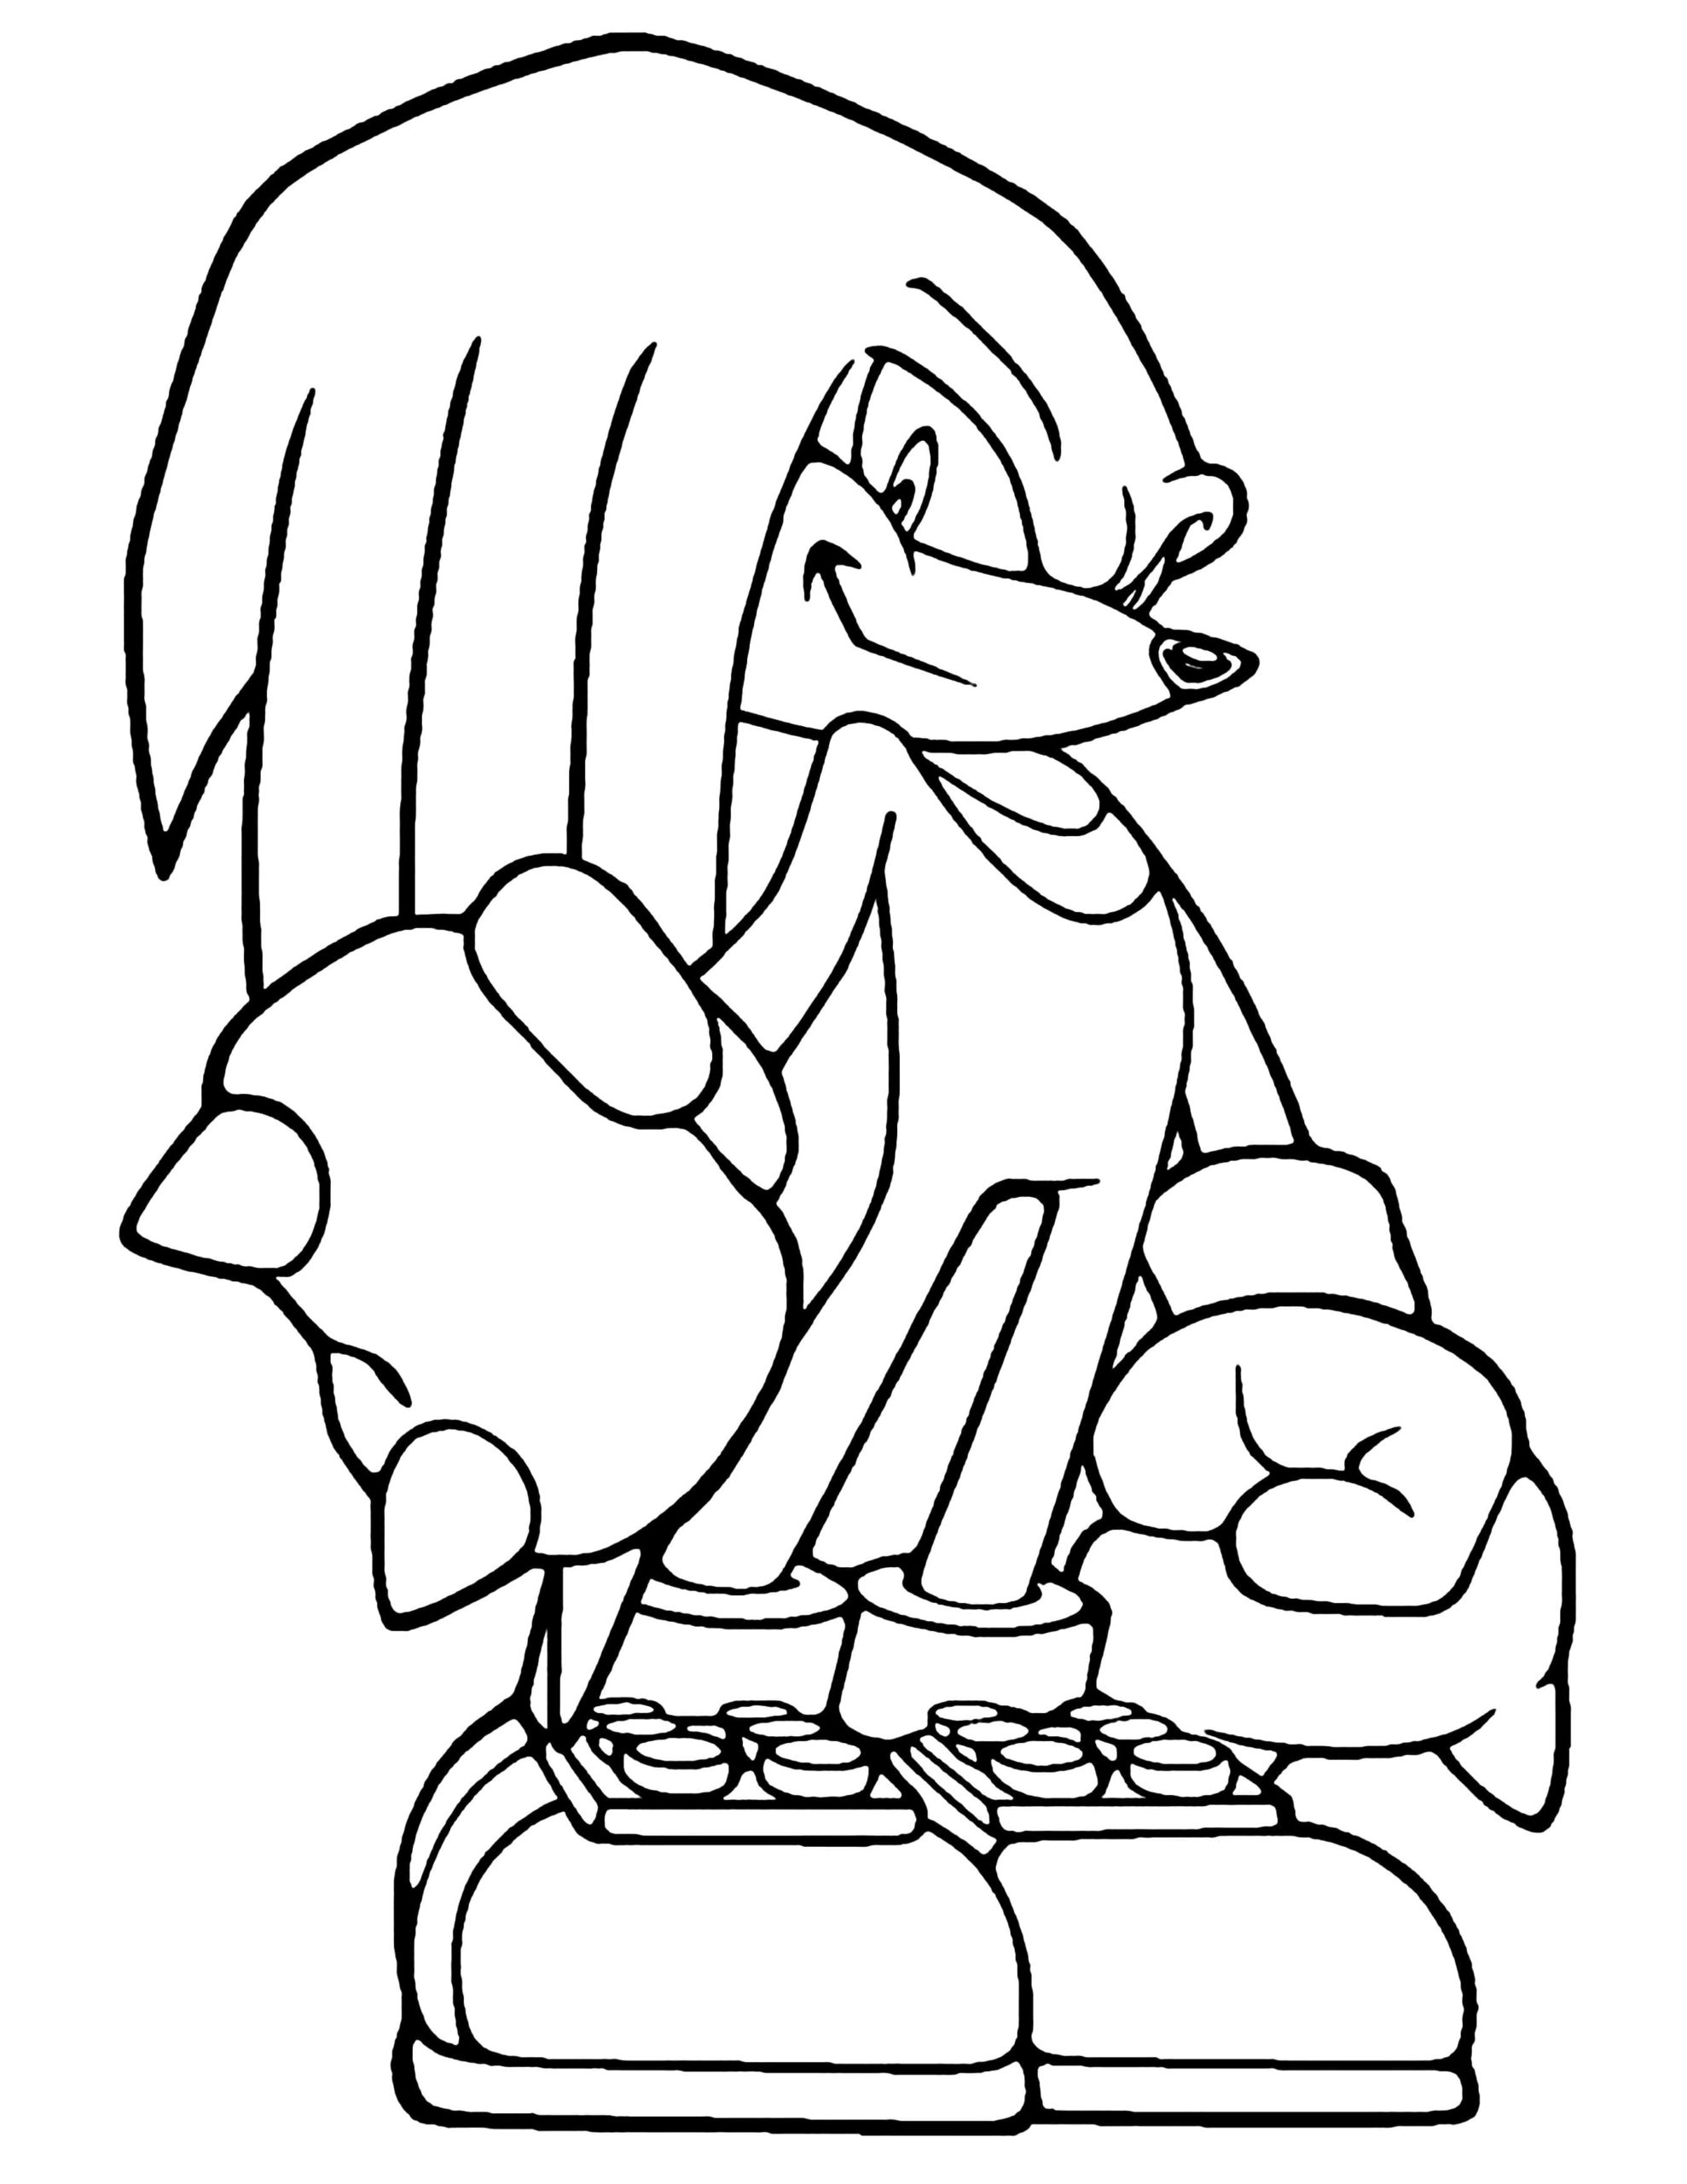 Raskrasil.com-Coloring-Pages-Knuckles-The-Echidna-7